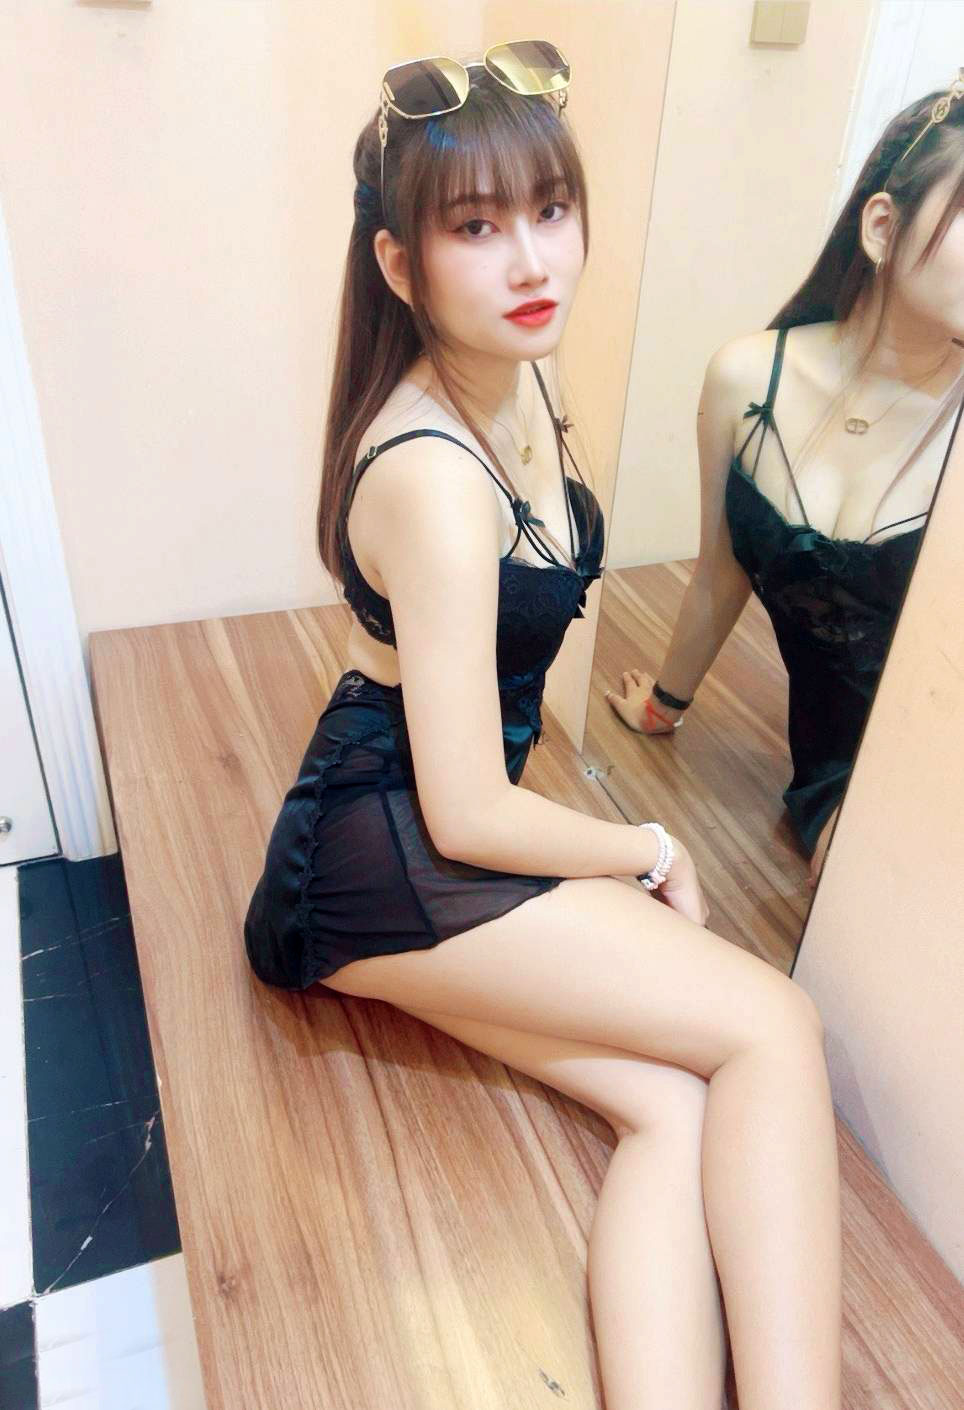 We provide erotic massage in Bangkok with full service and happy ending